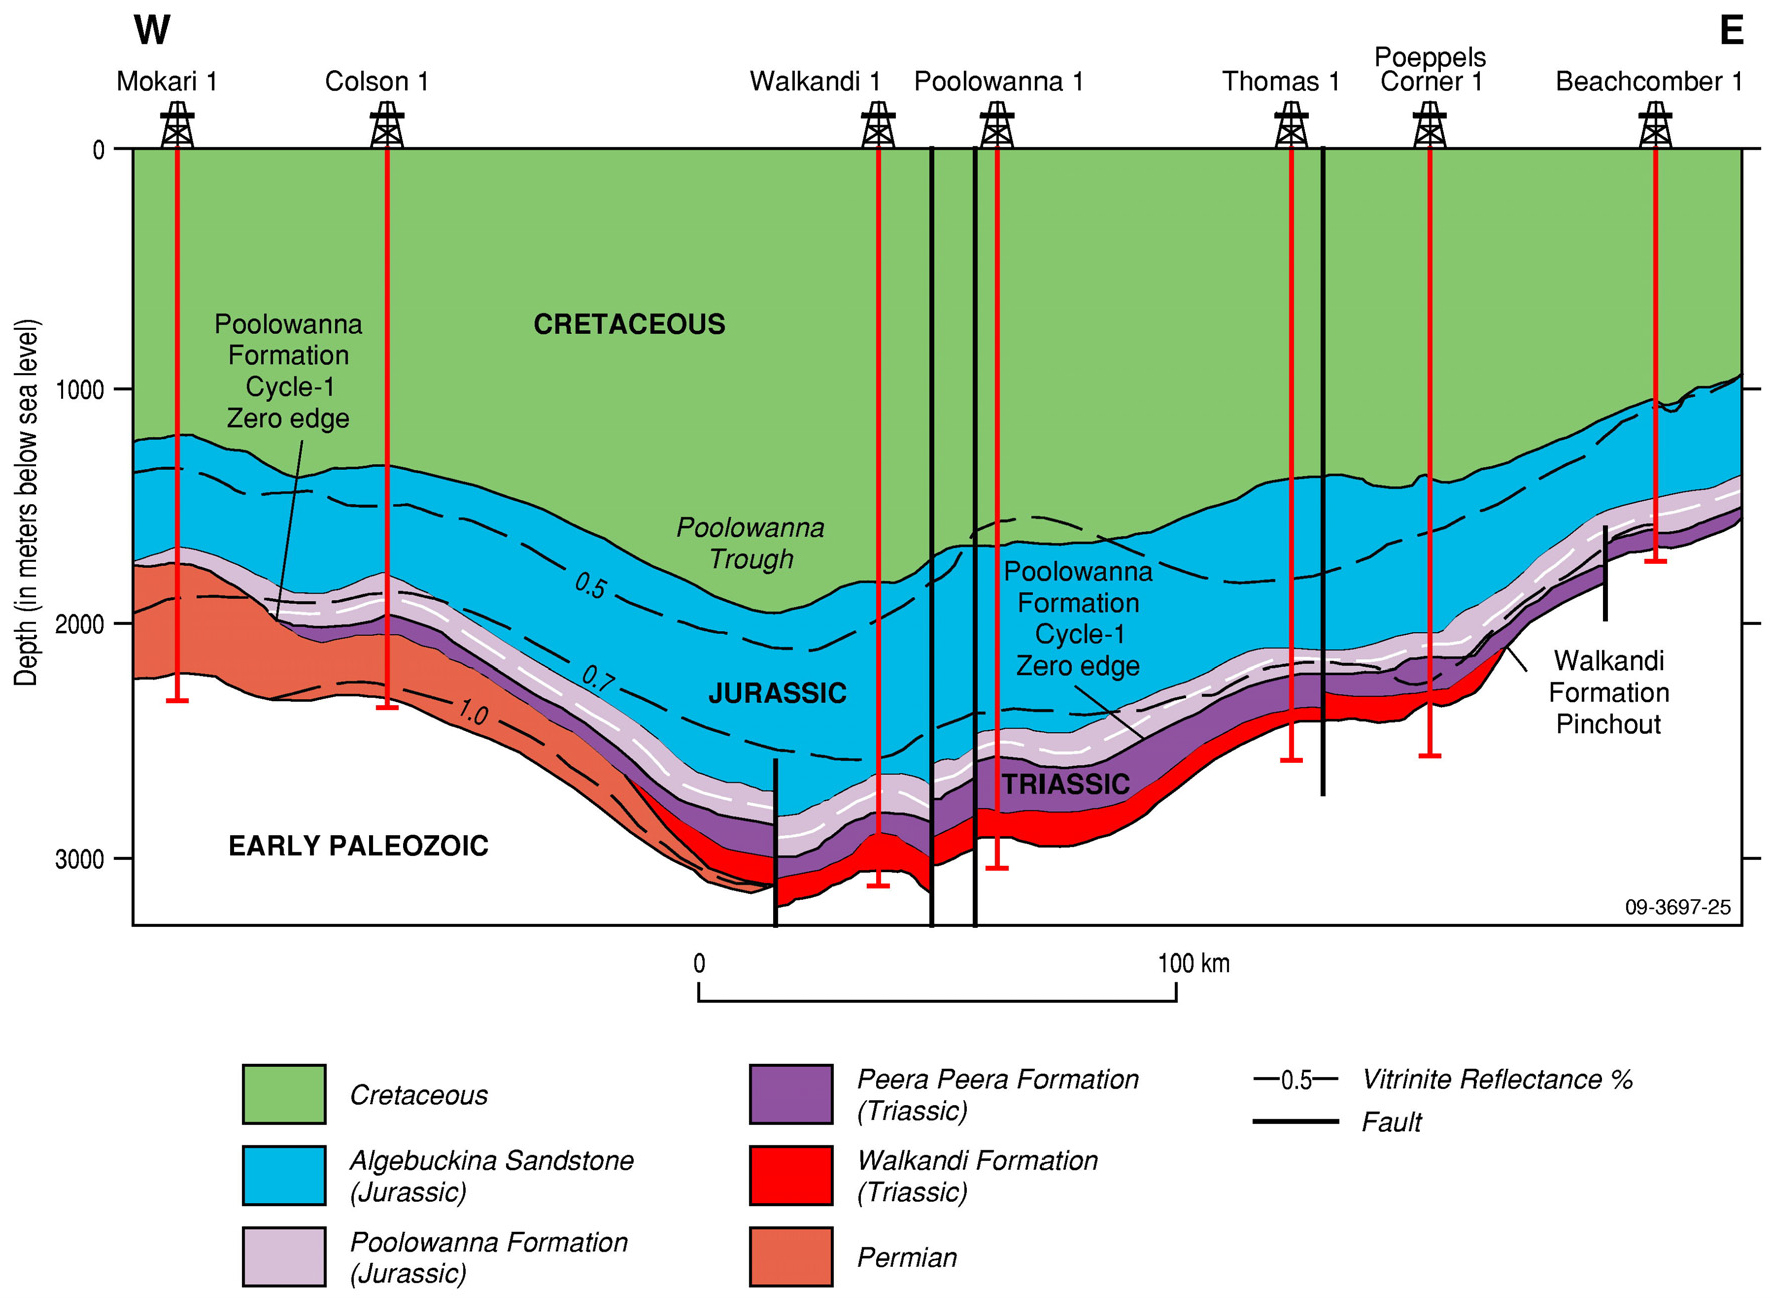 Cross section of the Poolowanna Trough with isoreflectance contours, showing maturity of the sequence up to the basal Jurassic, and a progressively shallower mature sequence to the east (from Radke, 2009, modified from Ambrose et al, 2007)